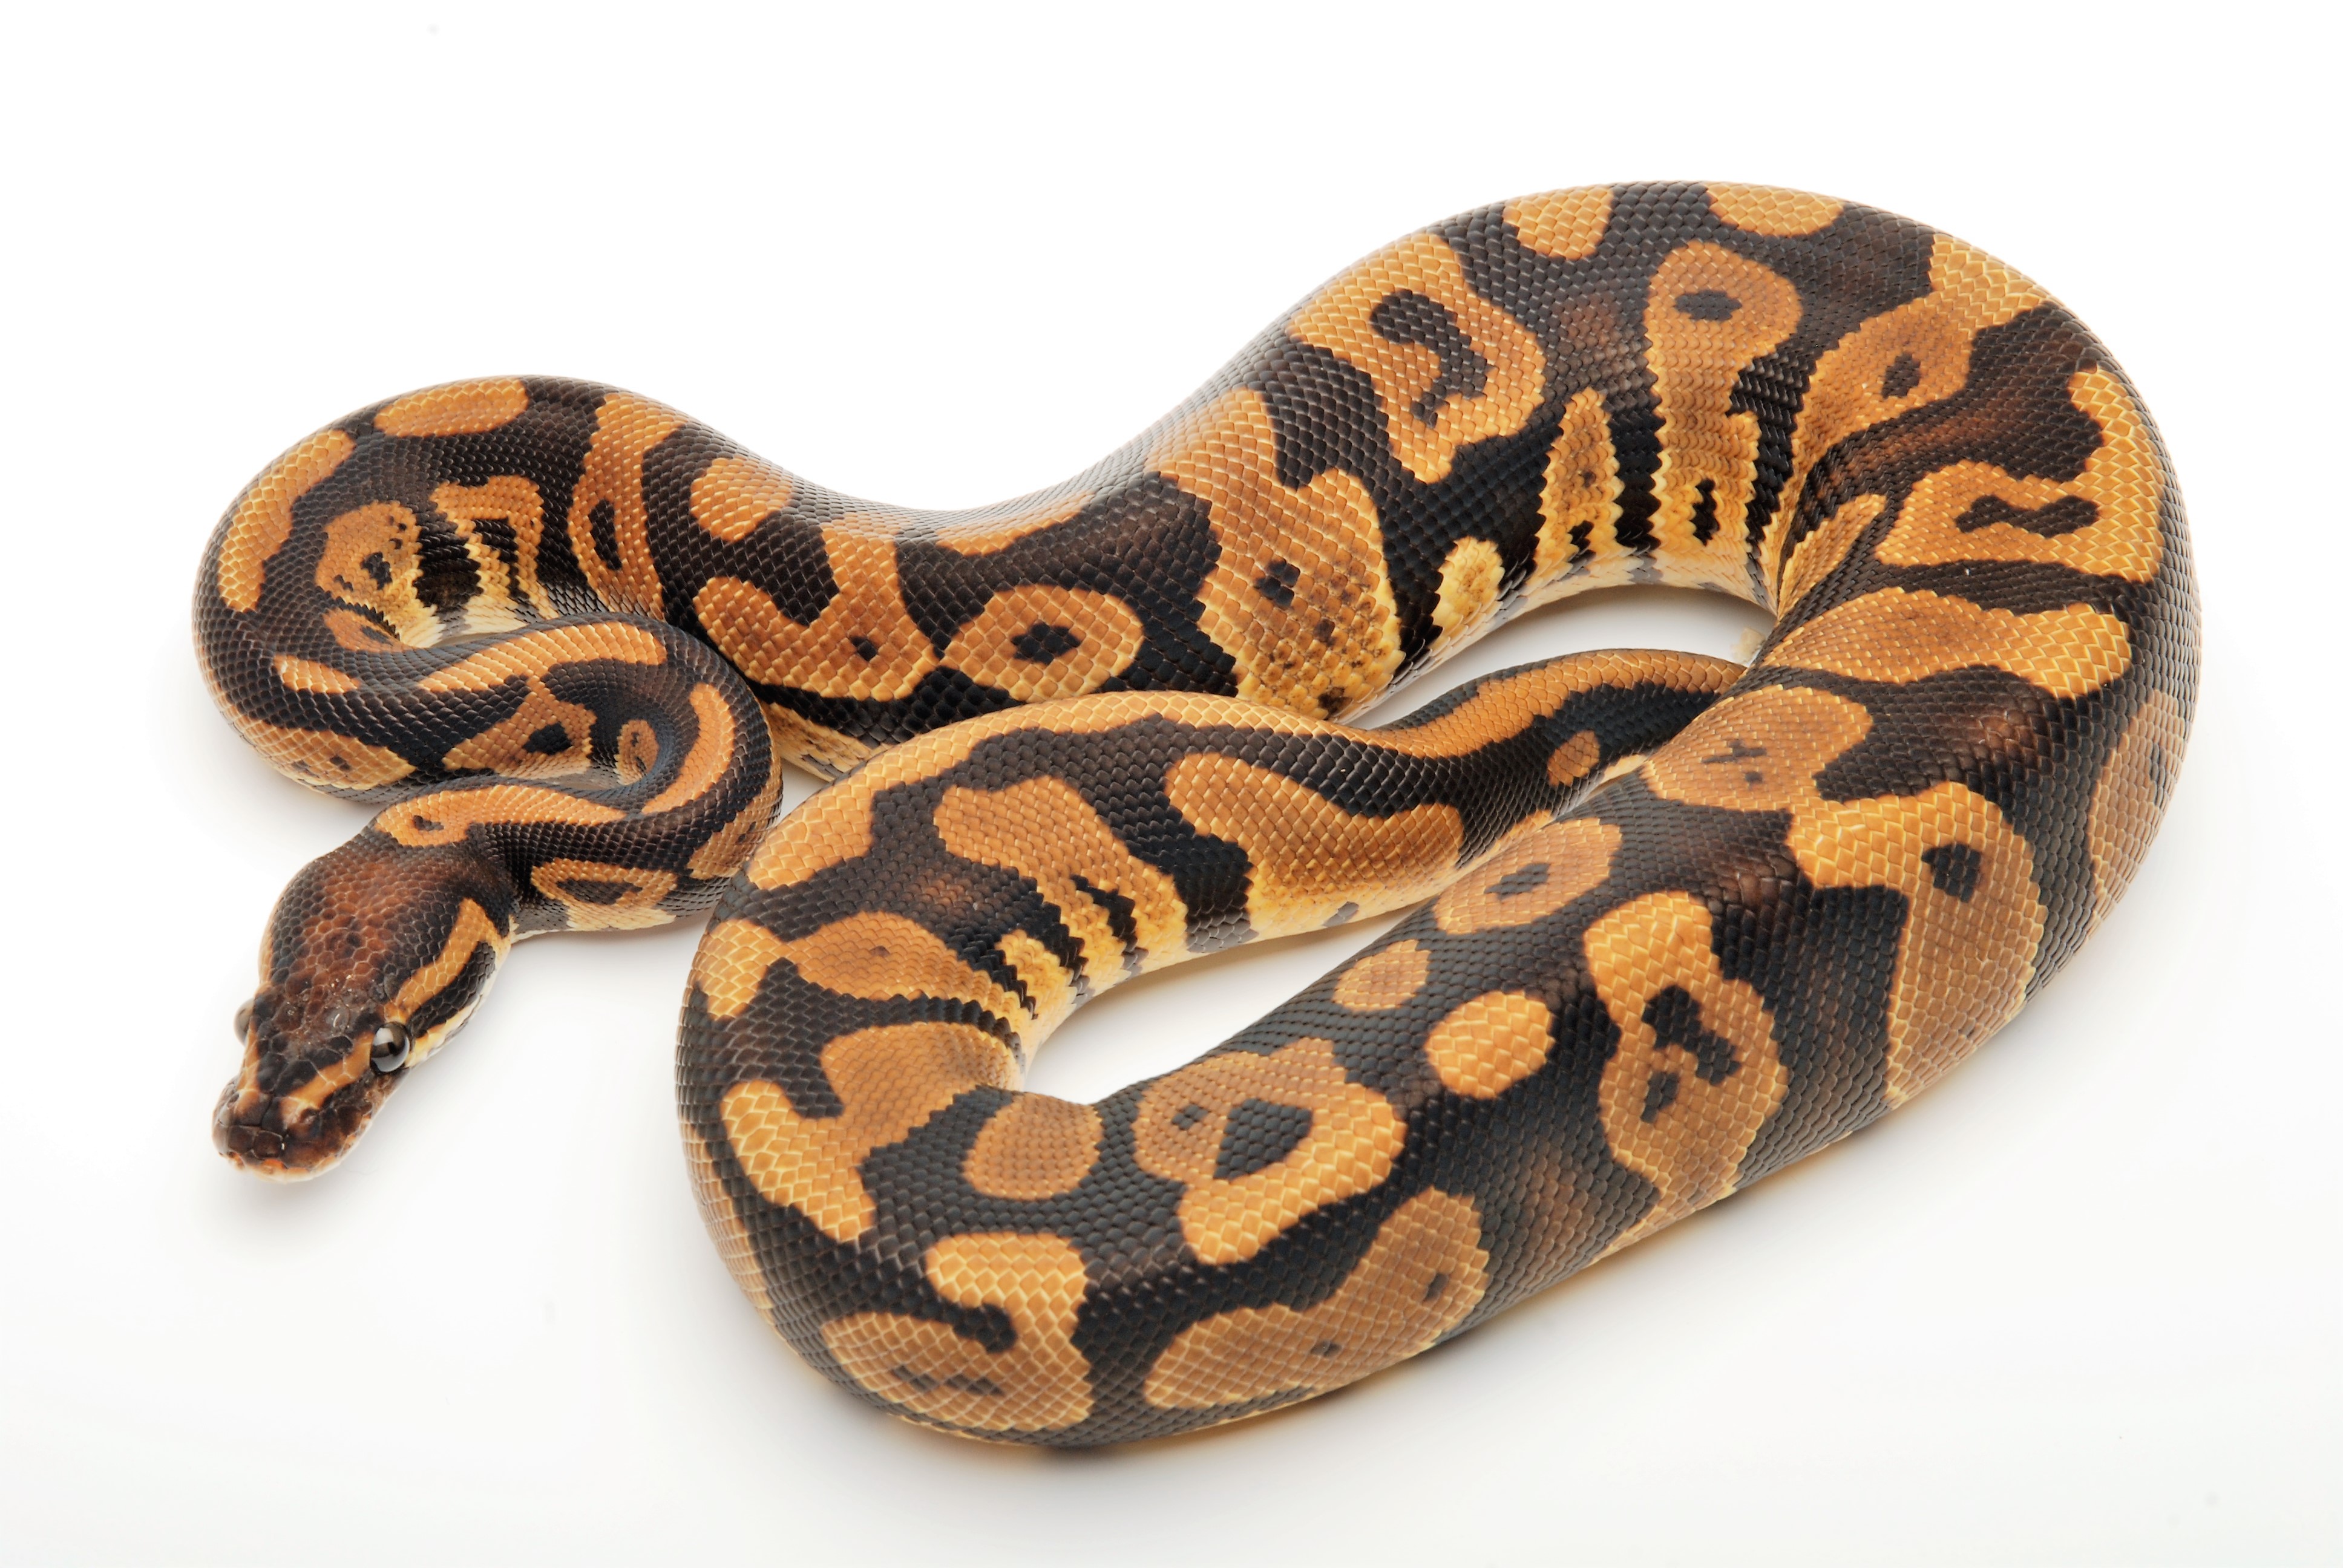 Confusion Ball Python by Austrian Reptiles